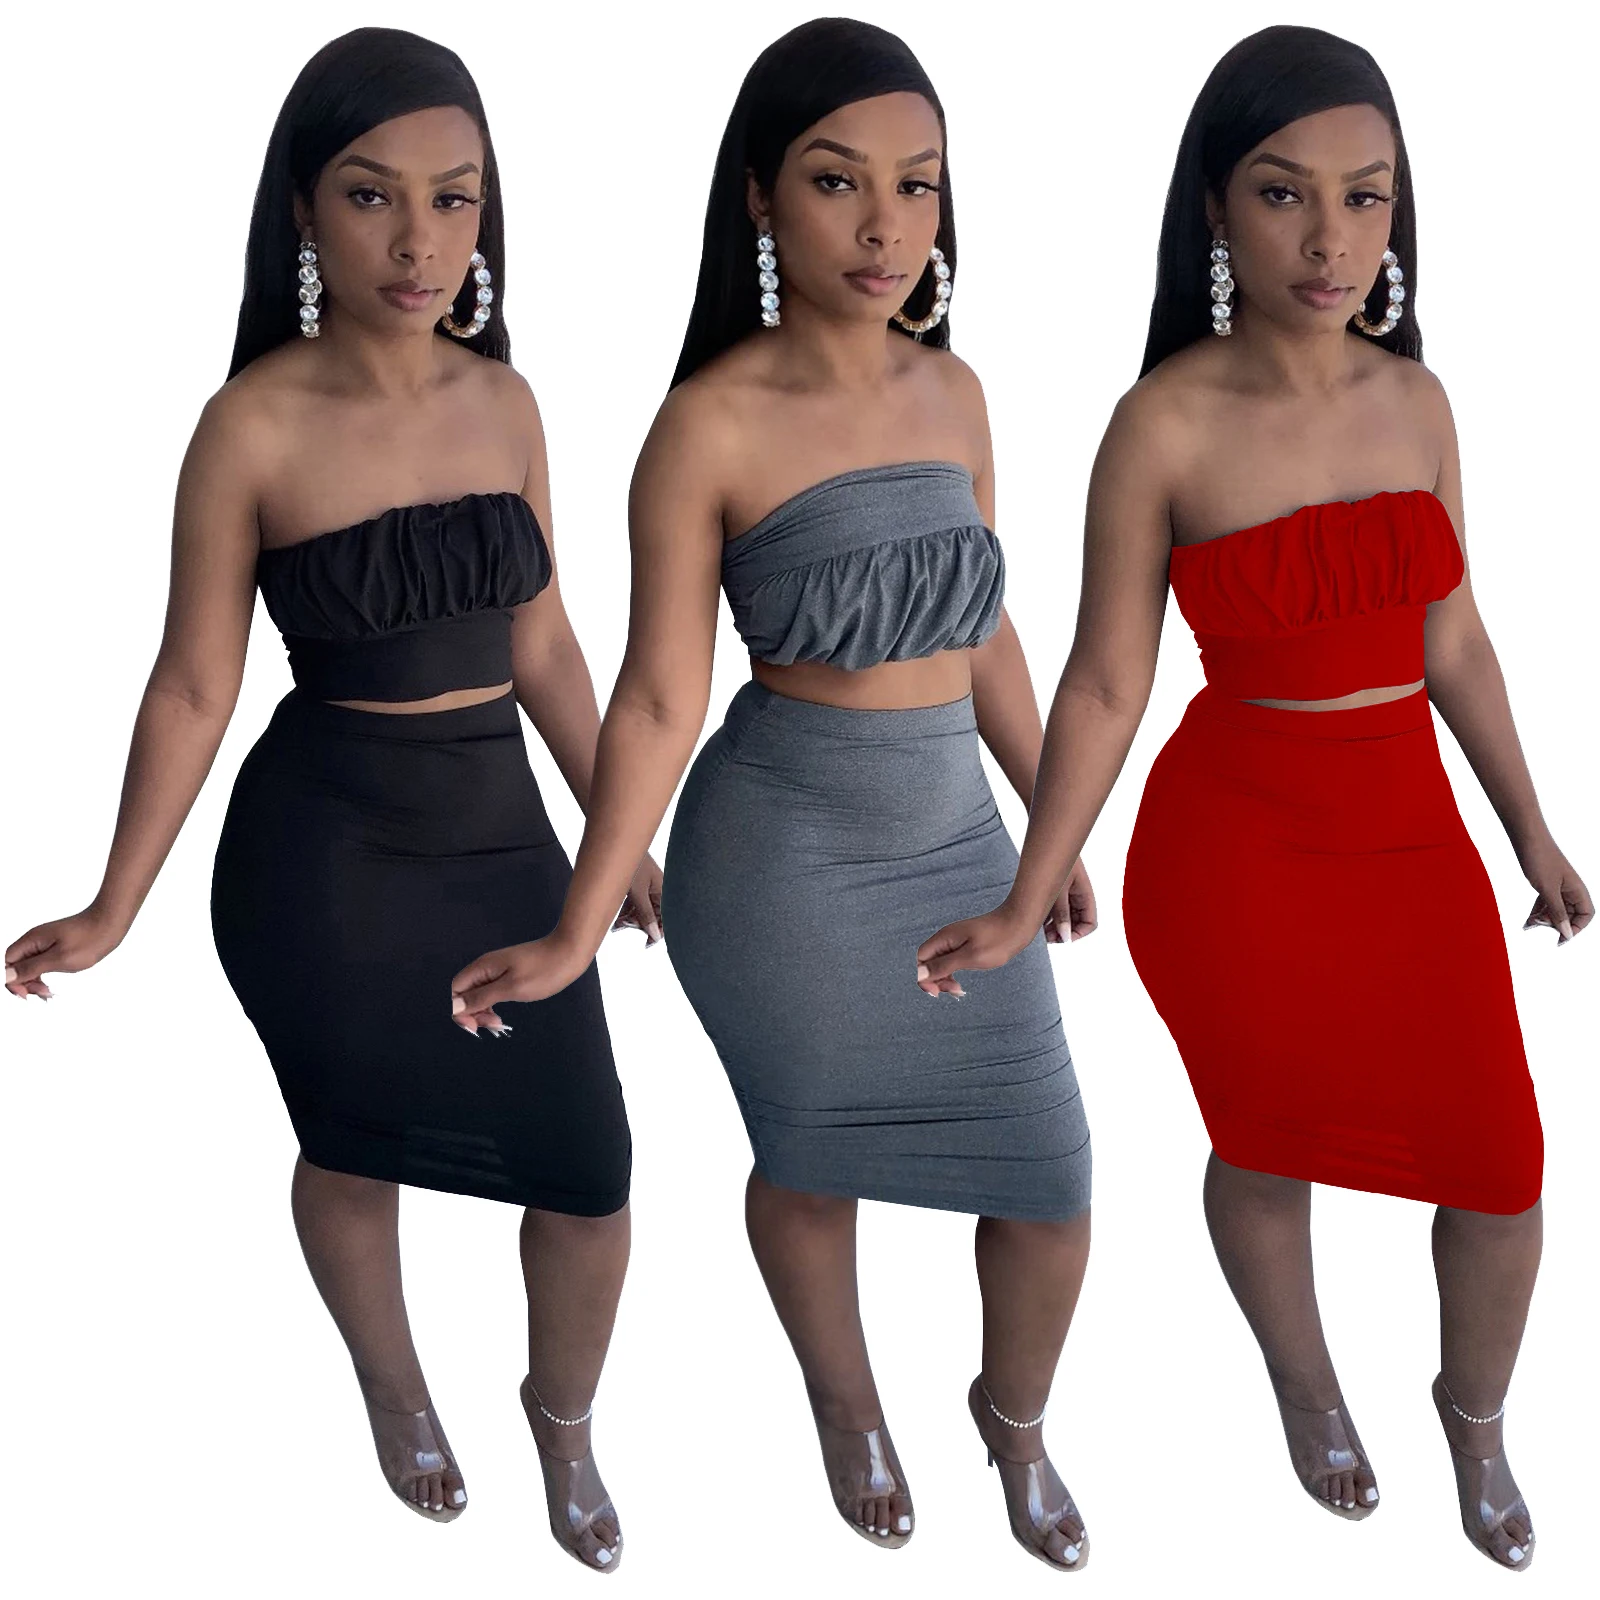 

2021 summer new arrivals trendy sexy strapless wrap party pencil dress 2 two piece long skirt set women clothes outfits clothing, Picture